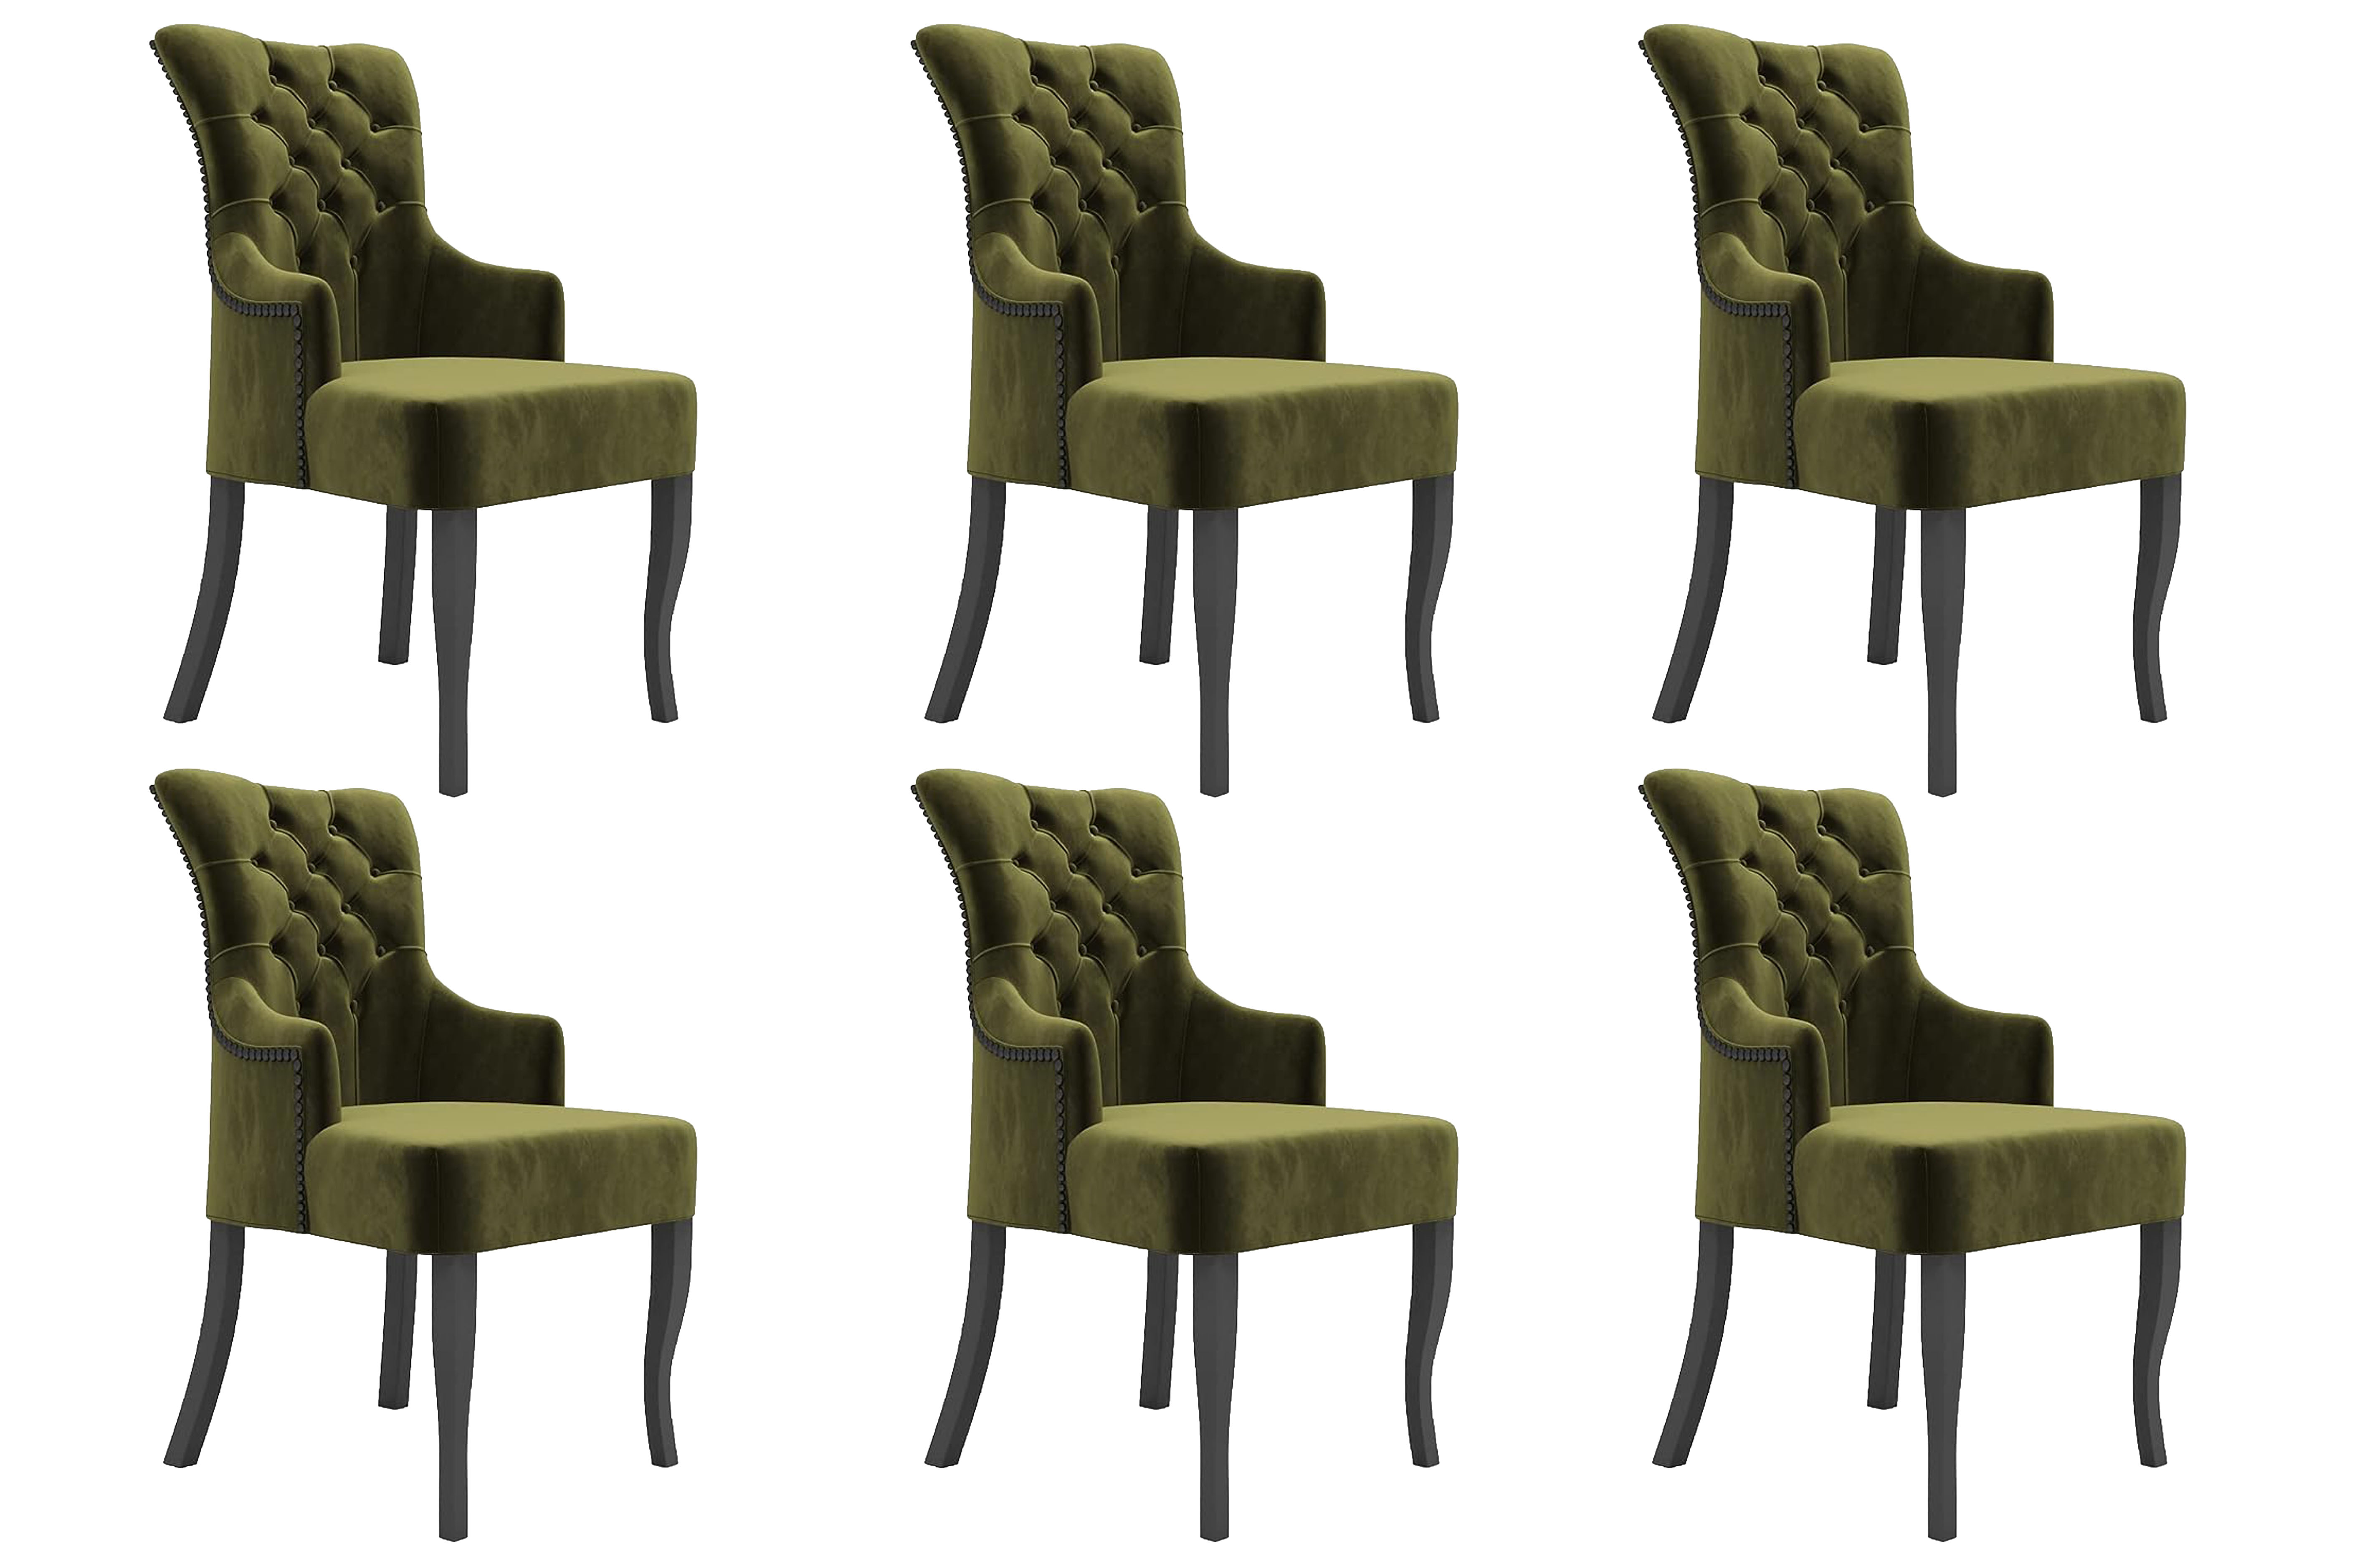 Dynamo green dining chair (set of 6)